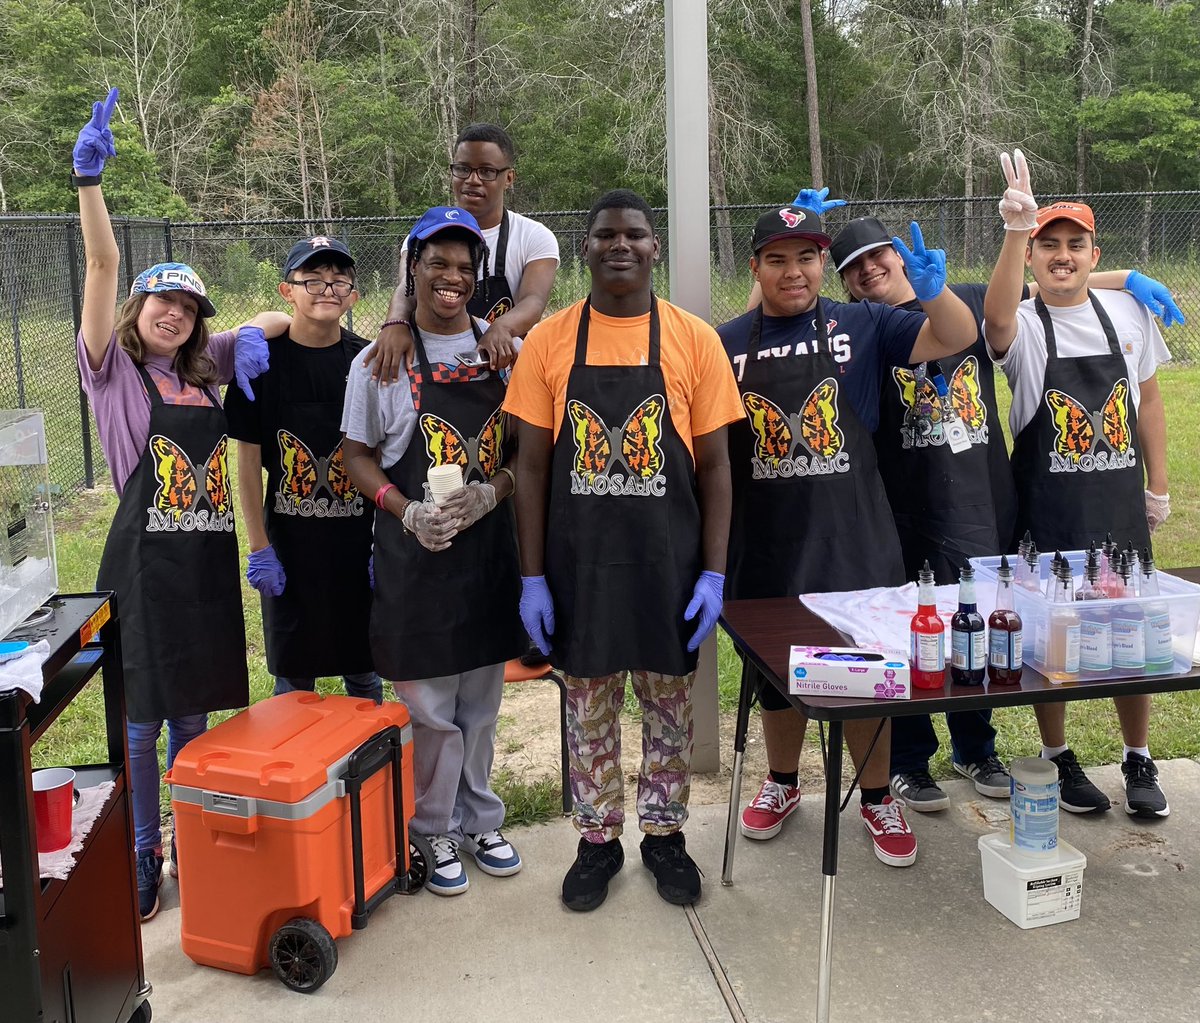 @MOSAIChumbleisd Brain Freeze Snow Cones may be coming to a location near you soon…Our Young Adult Entrepreneurs are Dreaming BIG and reinventing #workplaceculture @HumbleISD_CAM @HumbleISD 
Read how #disabilityInclusiveworkplaces drastically outperform 🙌newsroom.accenture.com/news/2023/comp…